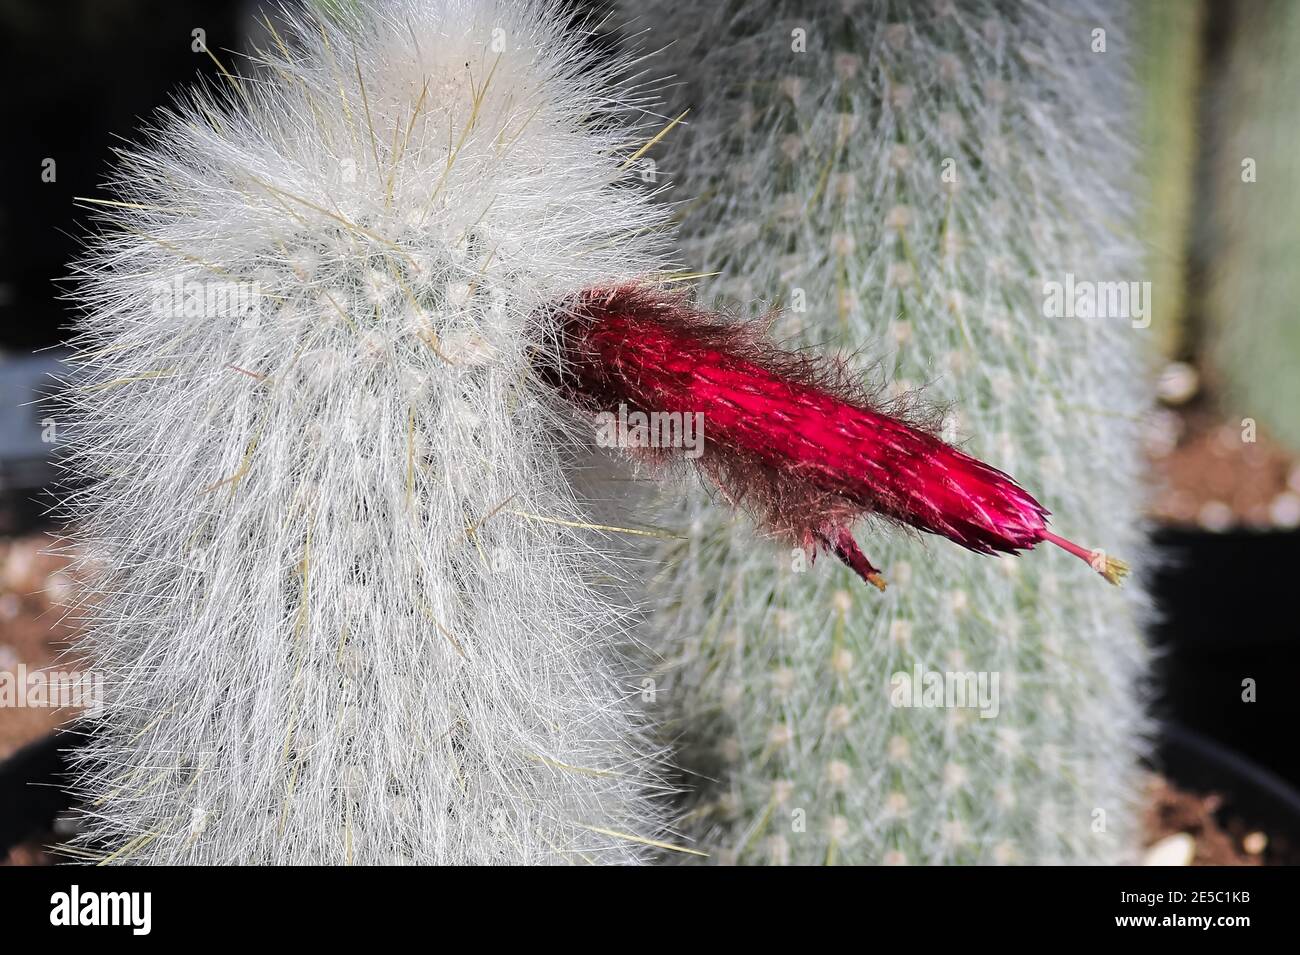 Closeup of the tubular flowers on a Silver Torch Cactus Stock Photo